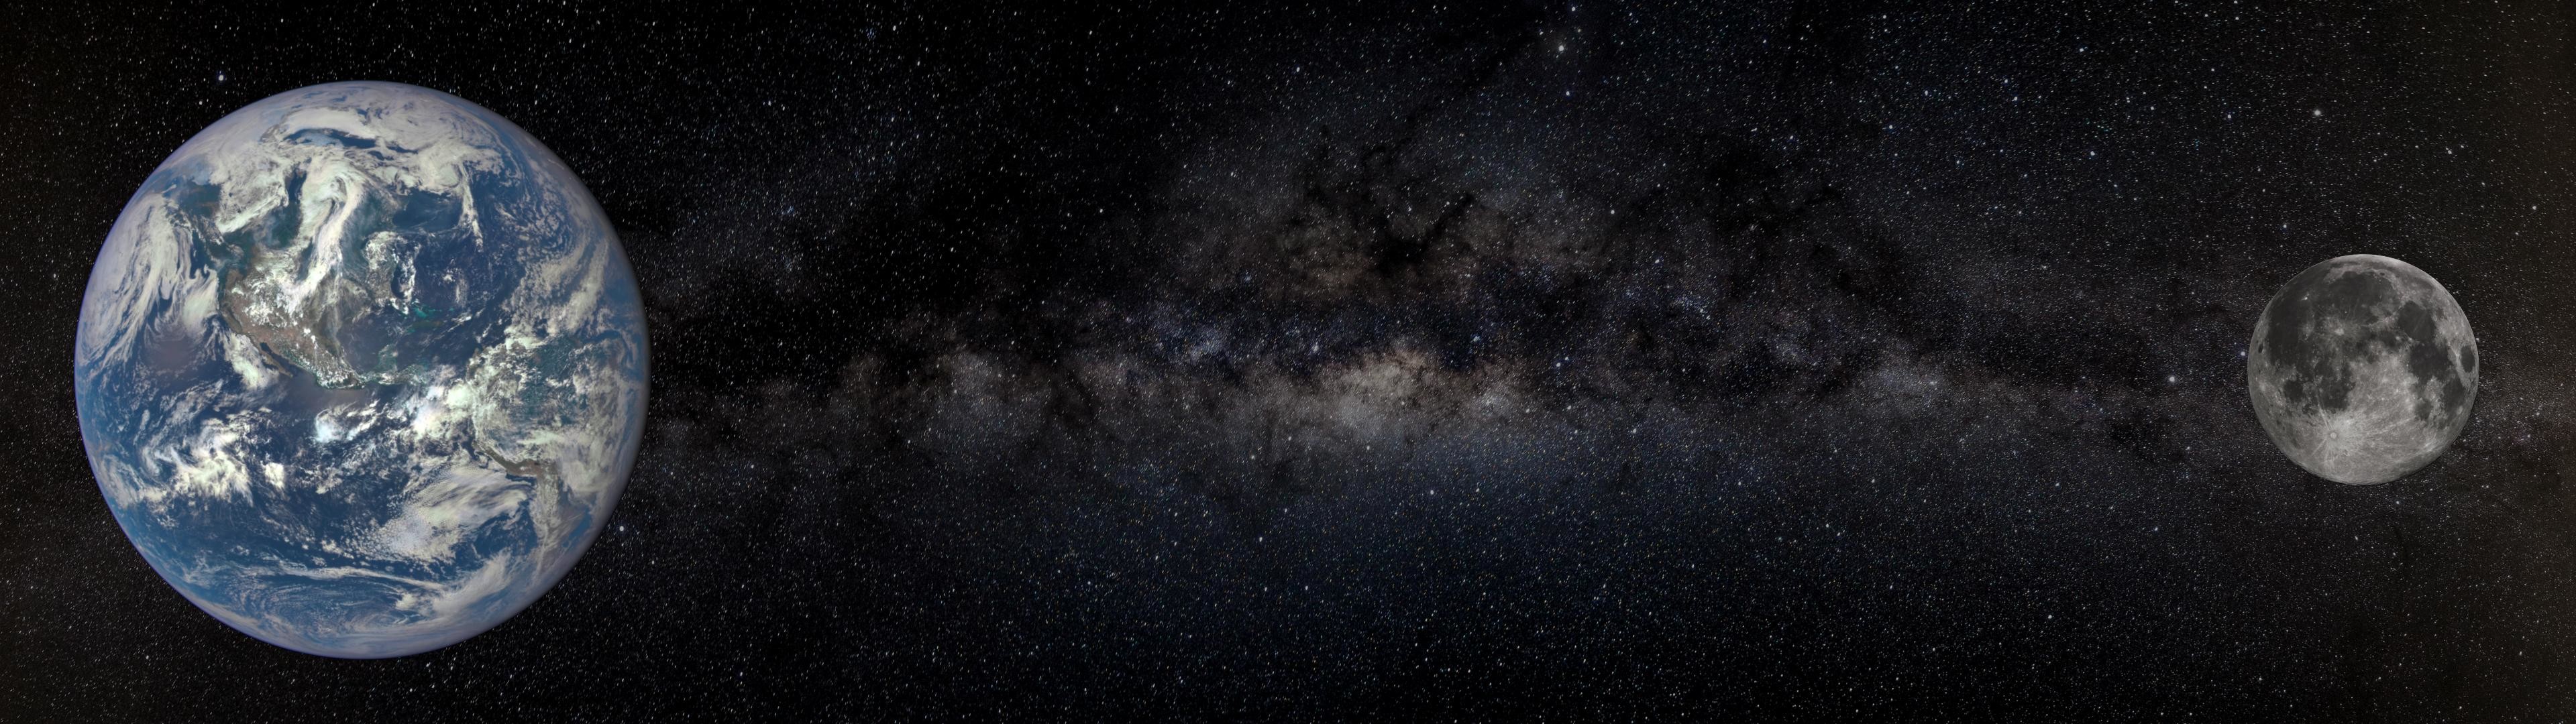 3840x1080 [] Earth and ...